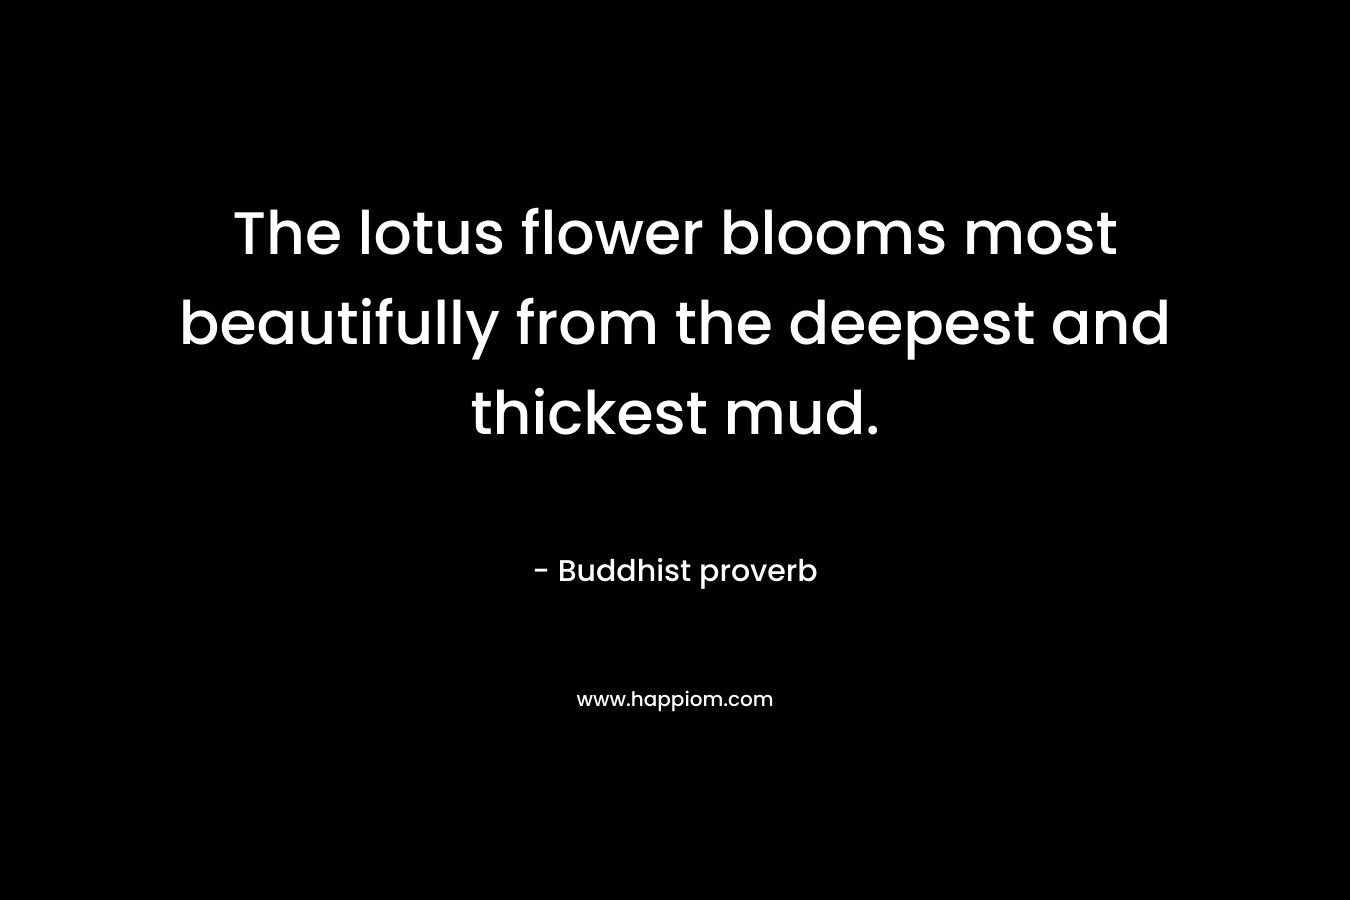 The lotus flower blooms most beautifully from the deepest and thickest mud.